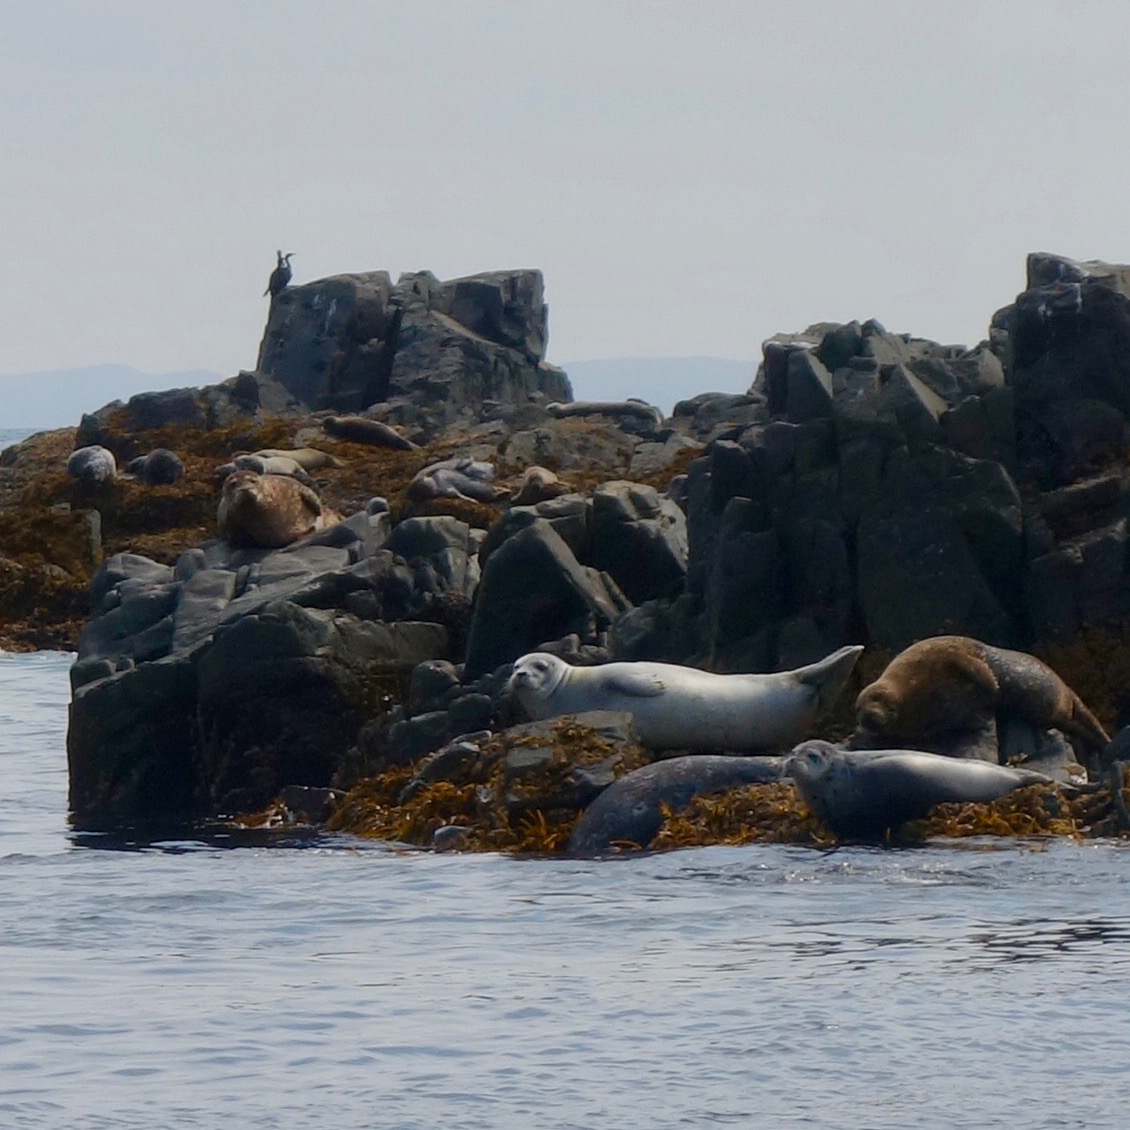 Seals hang out on some rocks in the middle of the bay while seagulls and other birds look on.  A small island off the coast of Sitka, Alaska. 